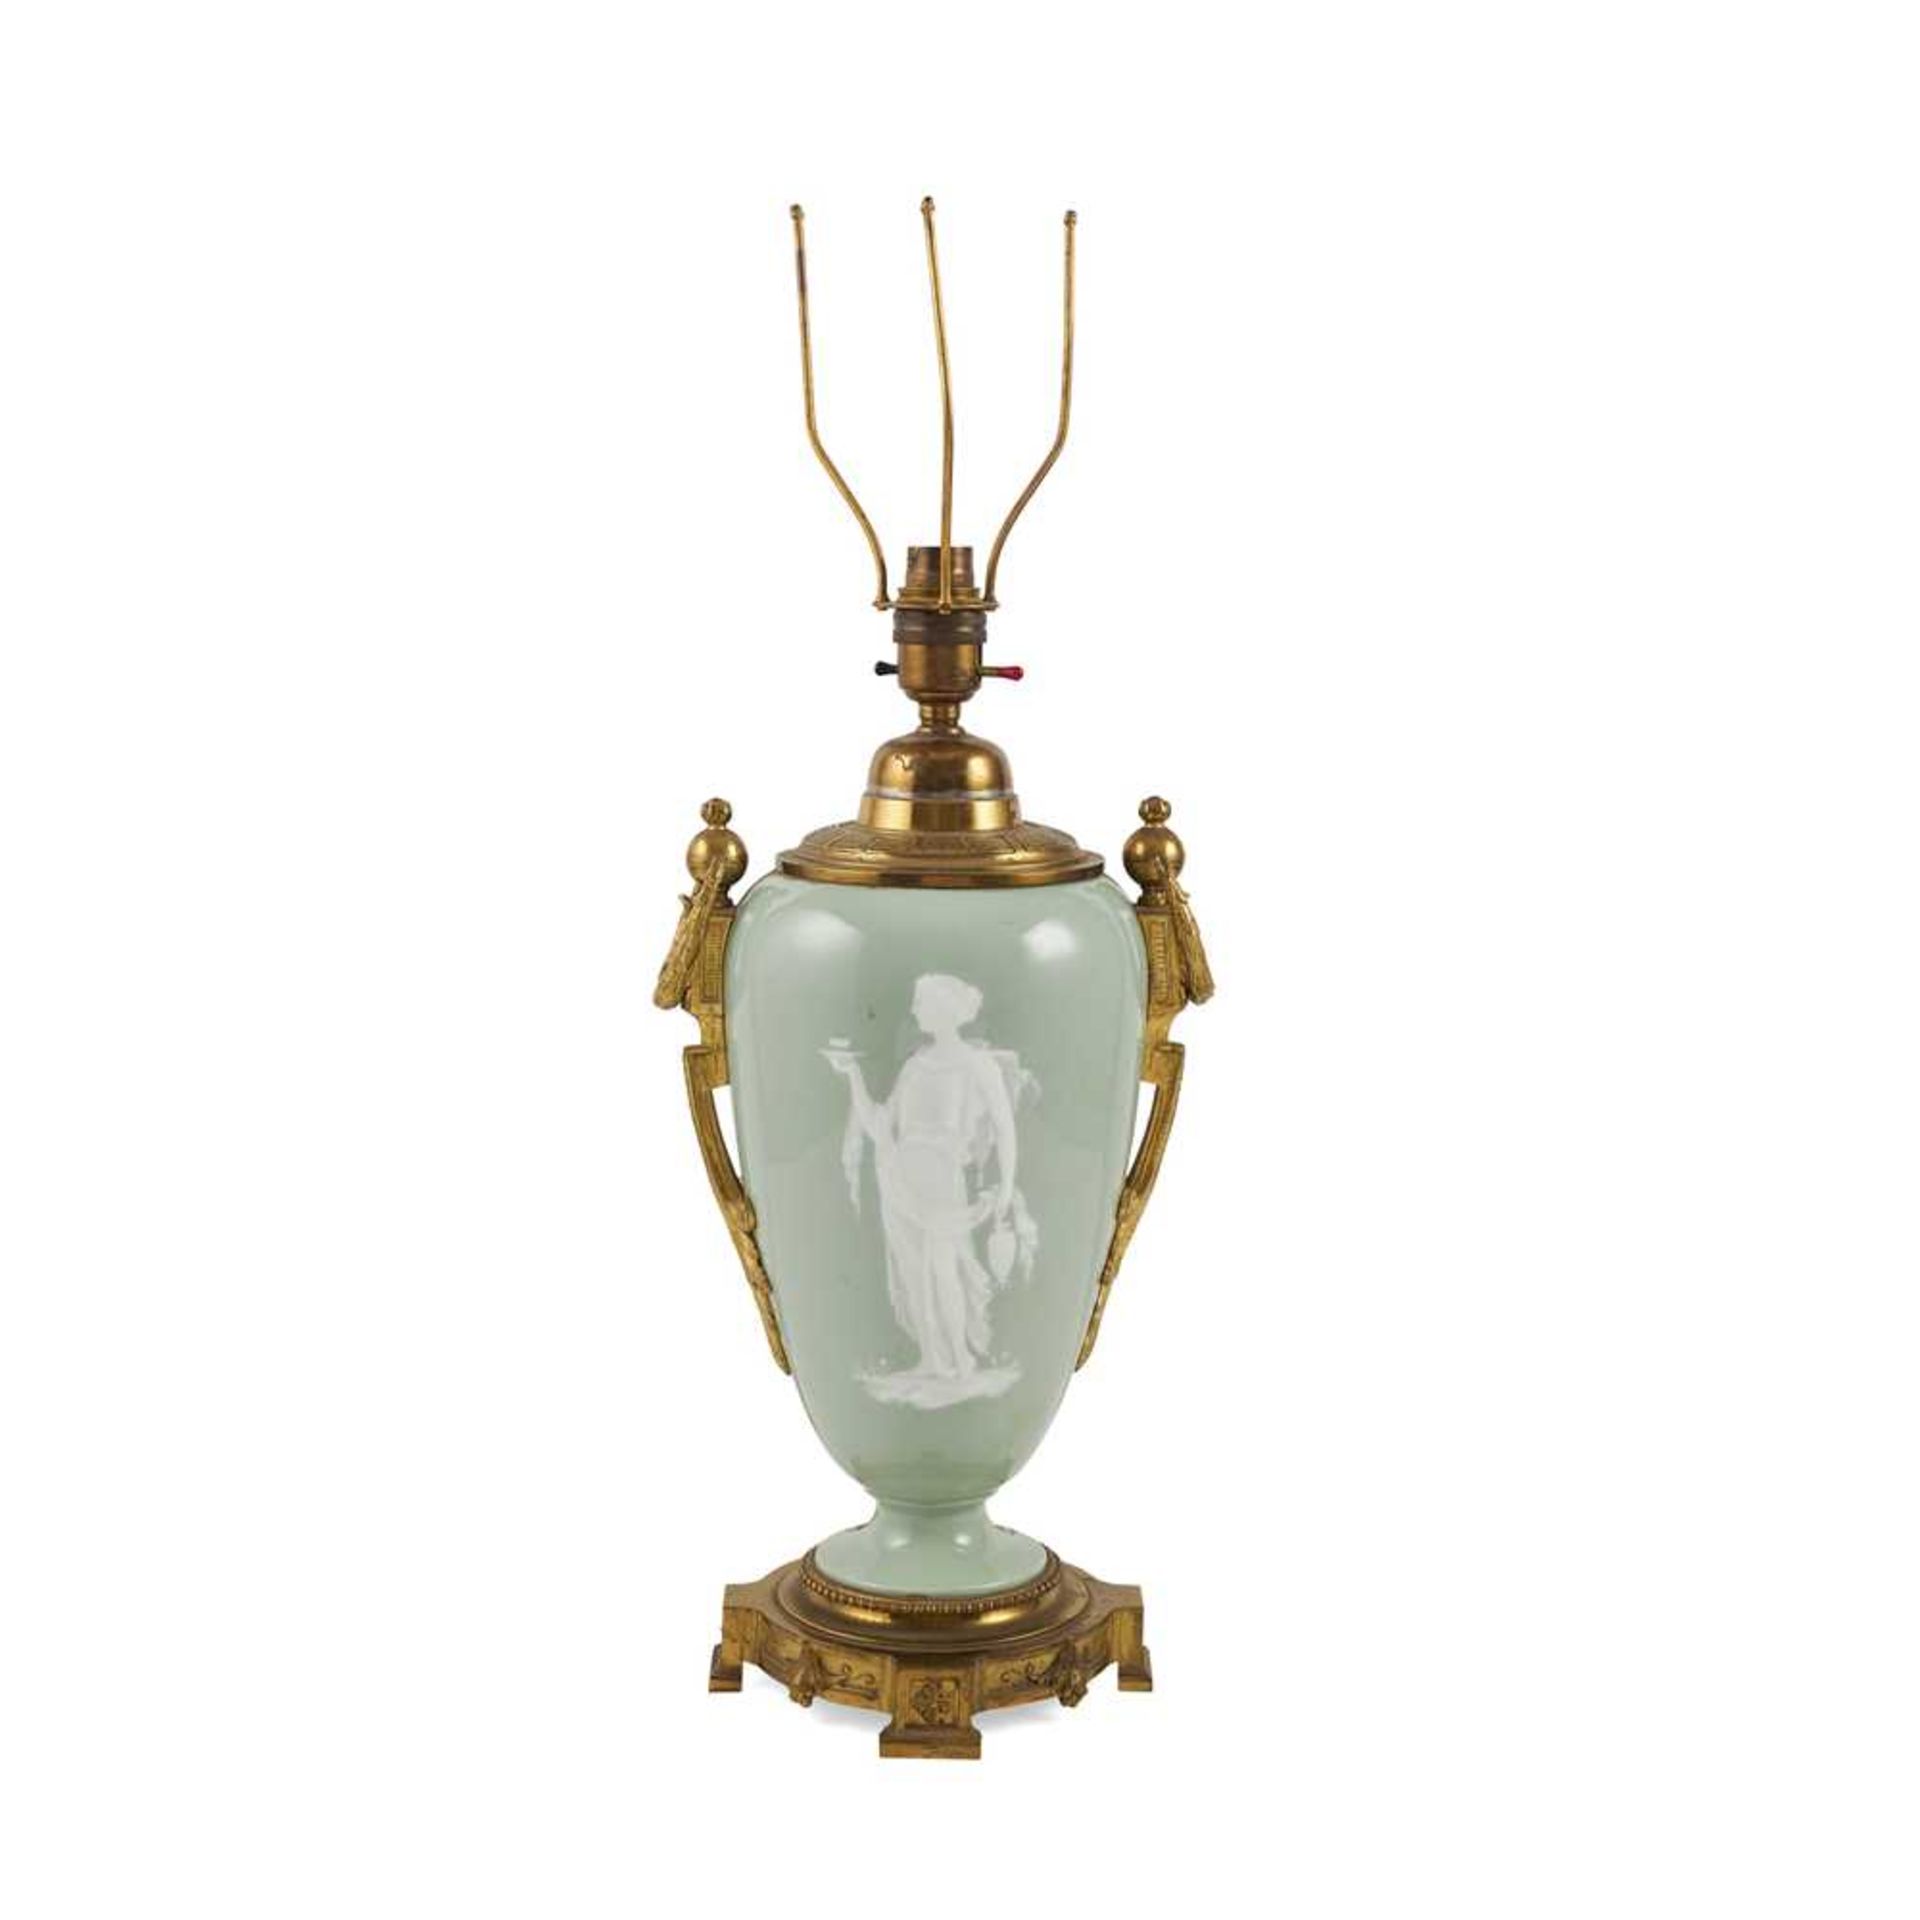 FRENCH GILT METAL MOUNTED PÂTE-SUR-PÂTE TABLE LAMP LATE 19TH CENTURY - Image 2 of 2